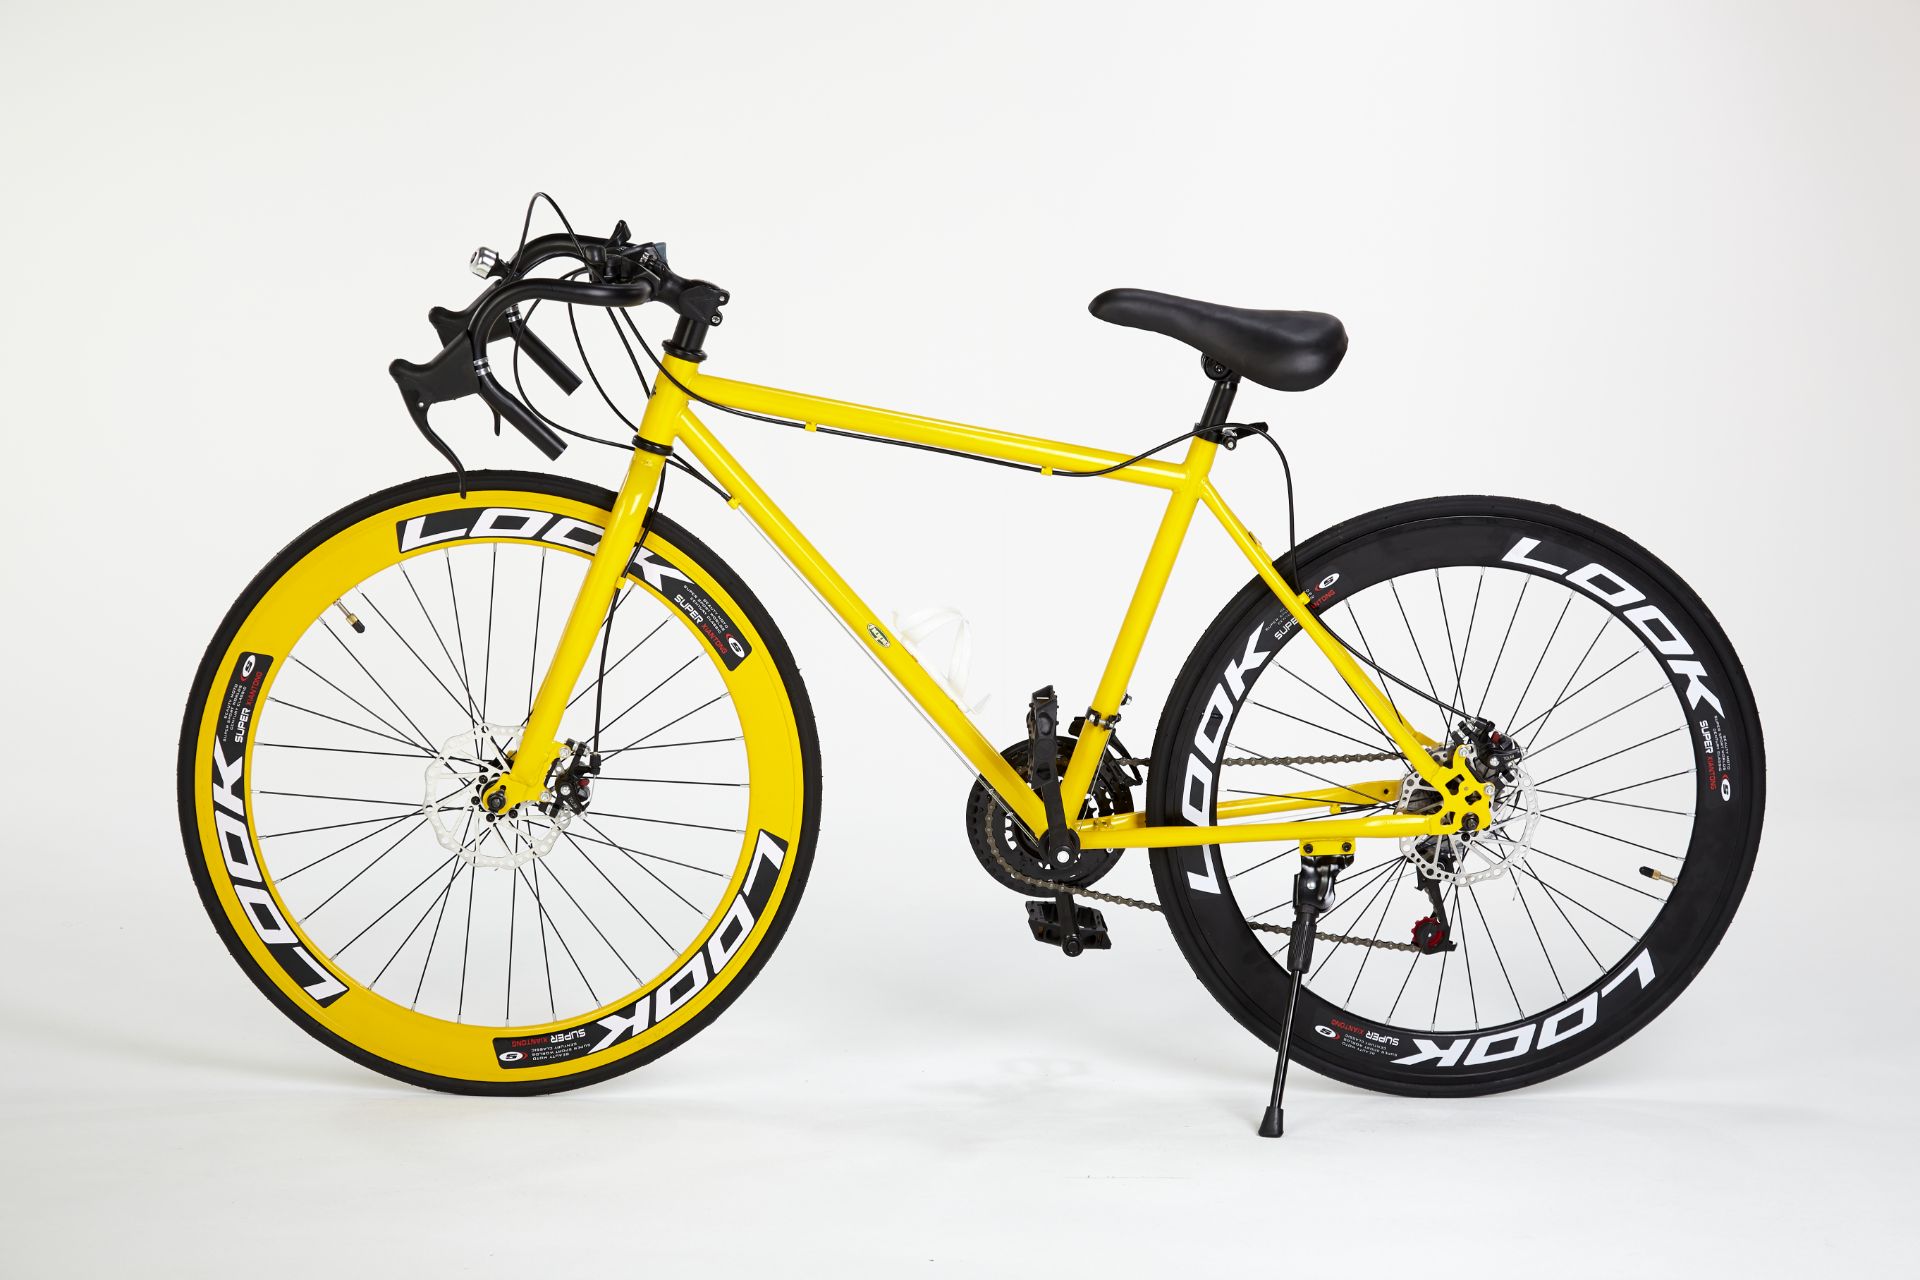 YELLOW STREET BIKE WITH 21 GREAR, BRAKE DISKS, KICK STAND, COOL THIN TYRES - Image 7 of 10